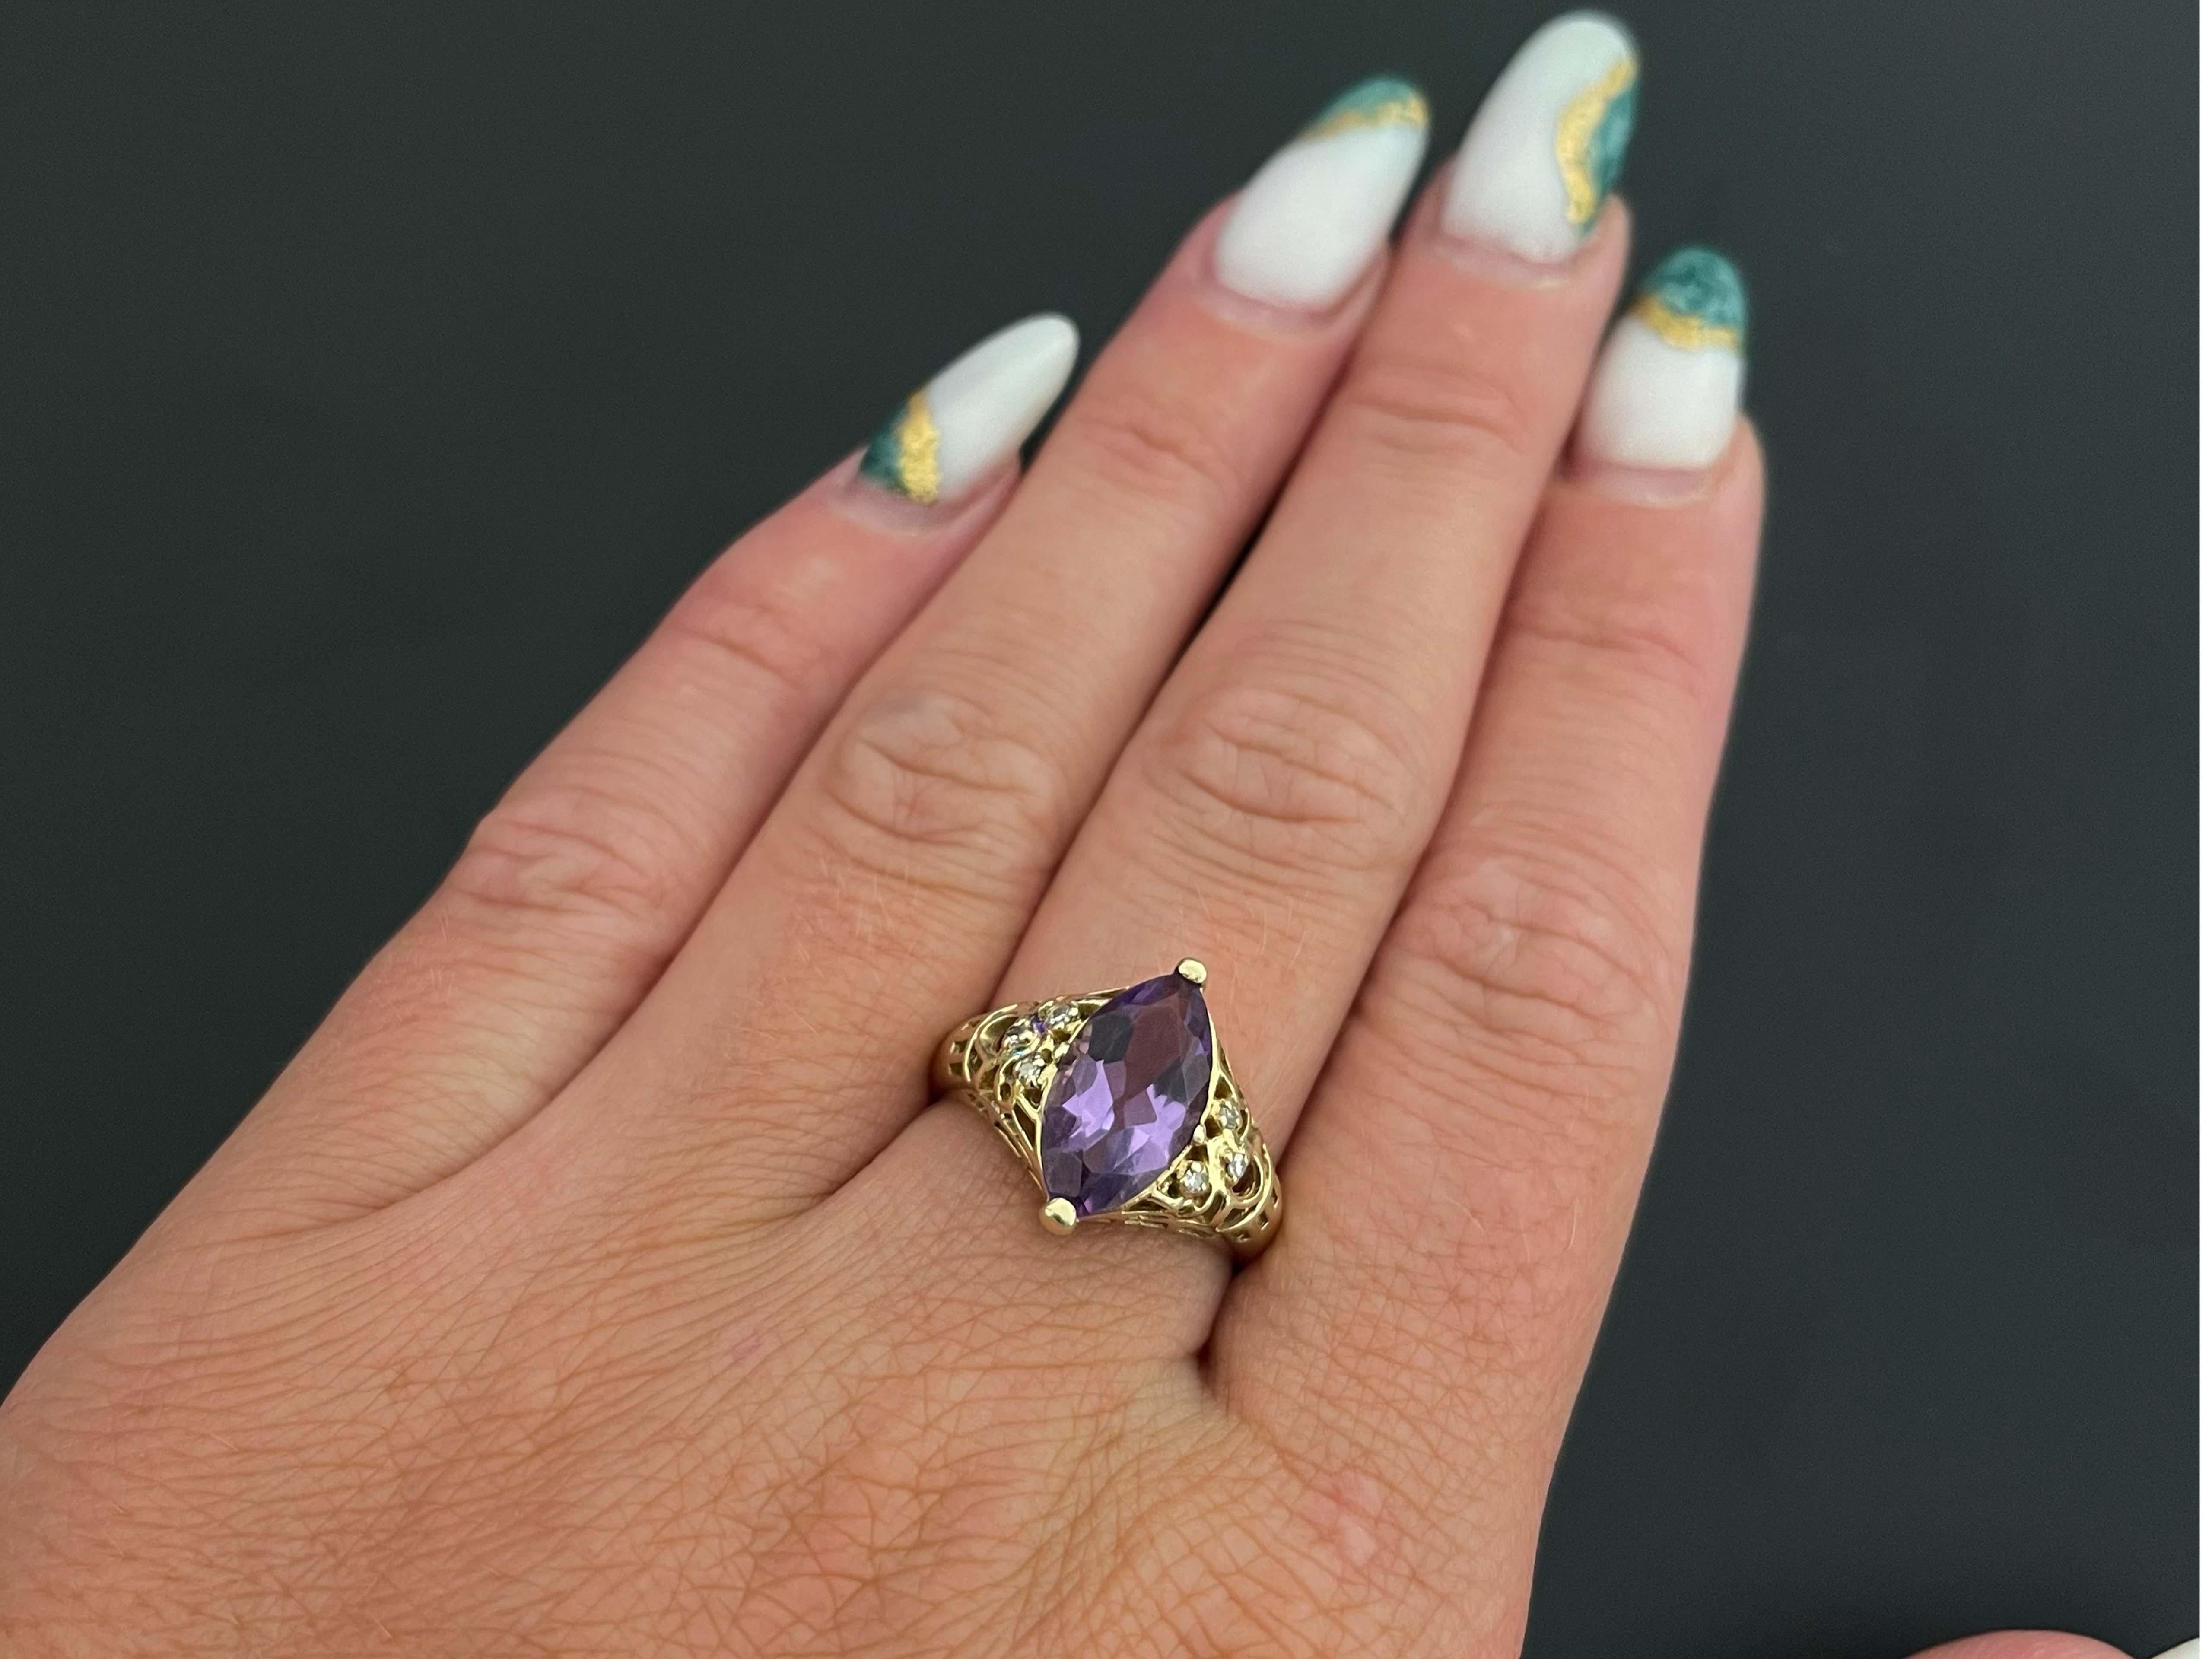 Vintage Marquise Amethyst & Diamond Ring in 14K Yellow Gold. This unique ring features a marquise cut purple Amethyst center gemstone with brilliant faceting. The Amethyst measures approximately 15 mm x 7 mm with an estimated weight of 2.00 carats.